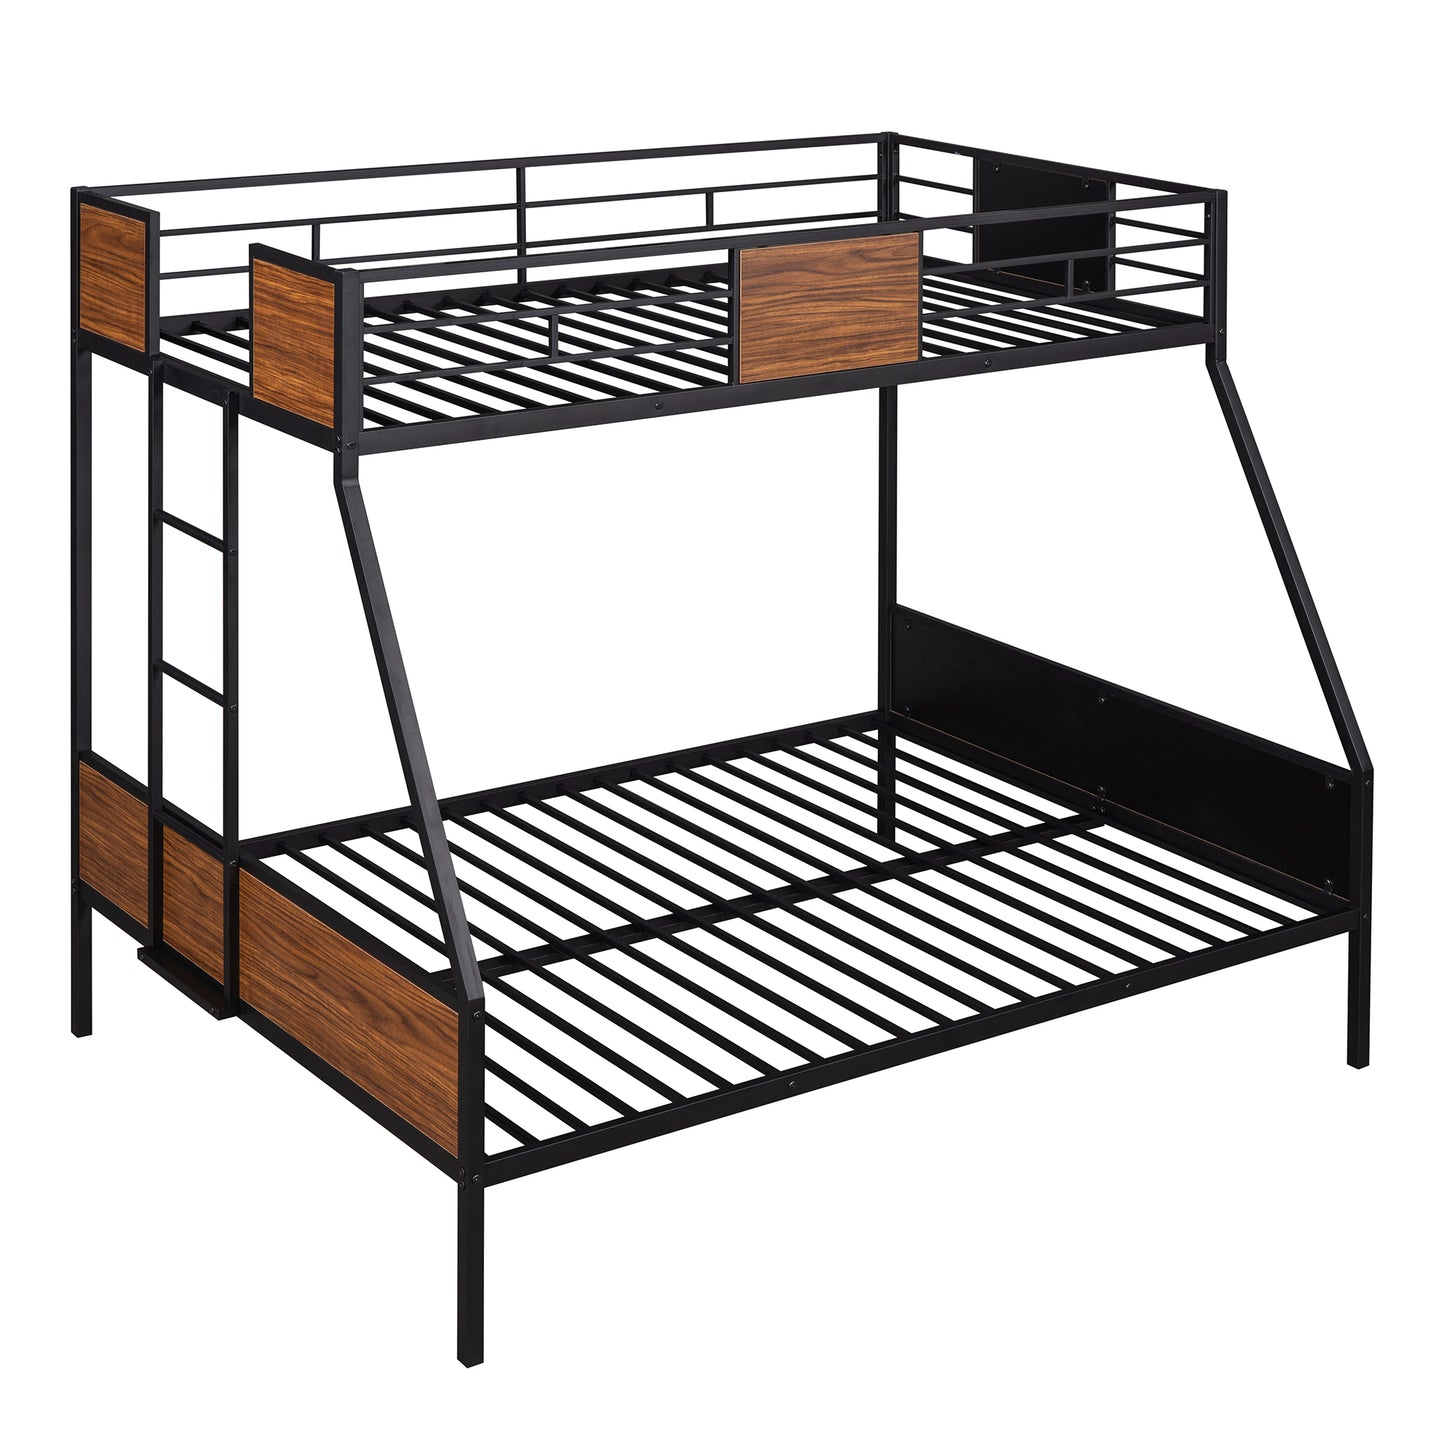 Twin-over-full bunk bed modern style steel frame bunk bed with safety rail, built-in ladder for bedroom, dorm, boys, girls, adults